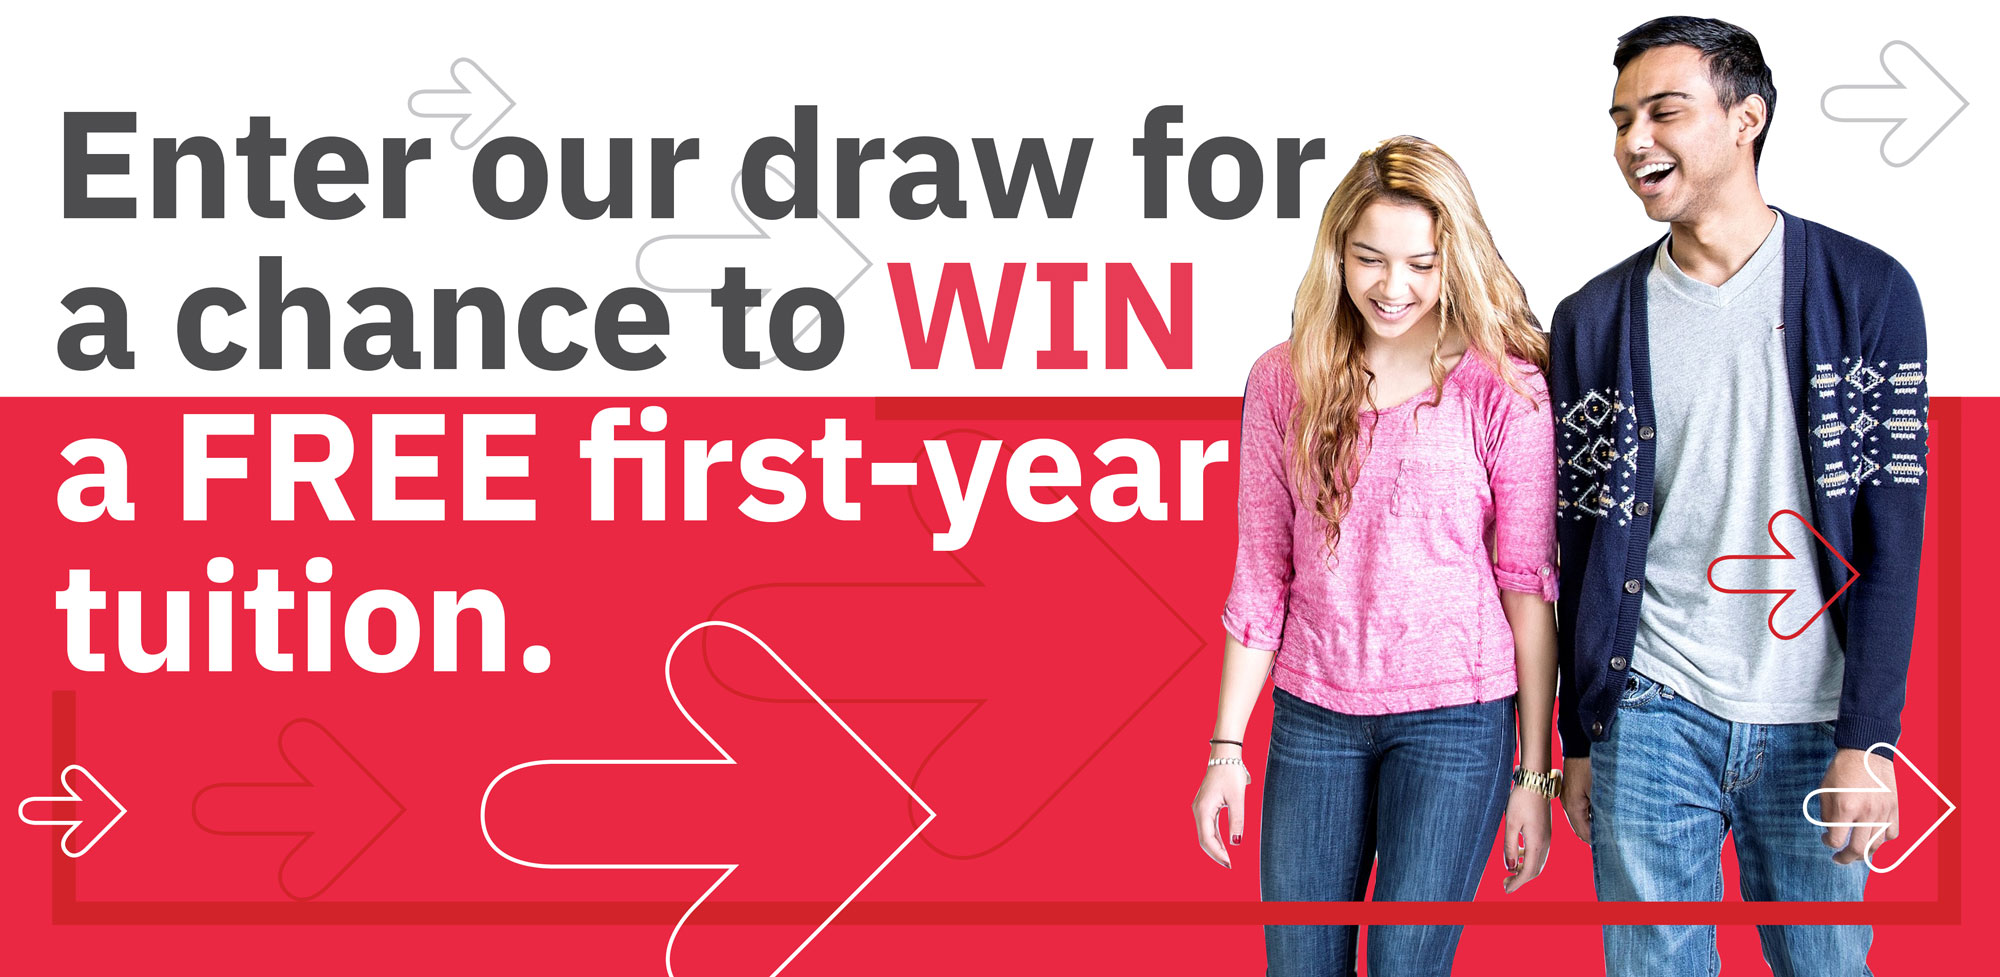 Enter our draw for a chance to win a free first-year tuition.